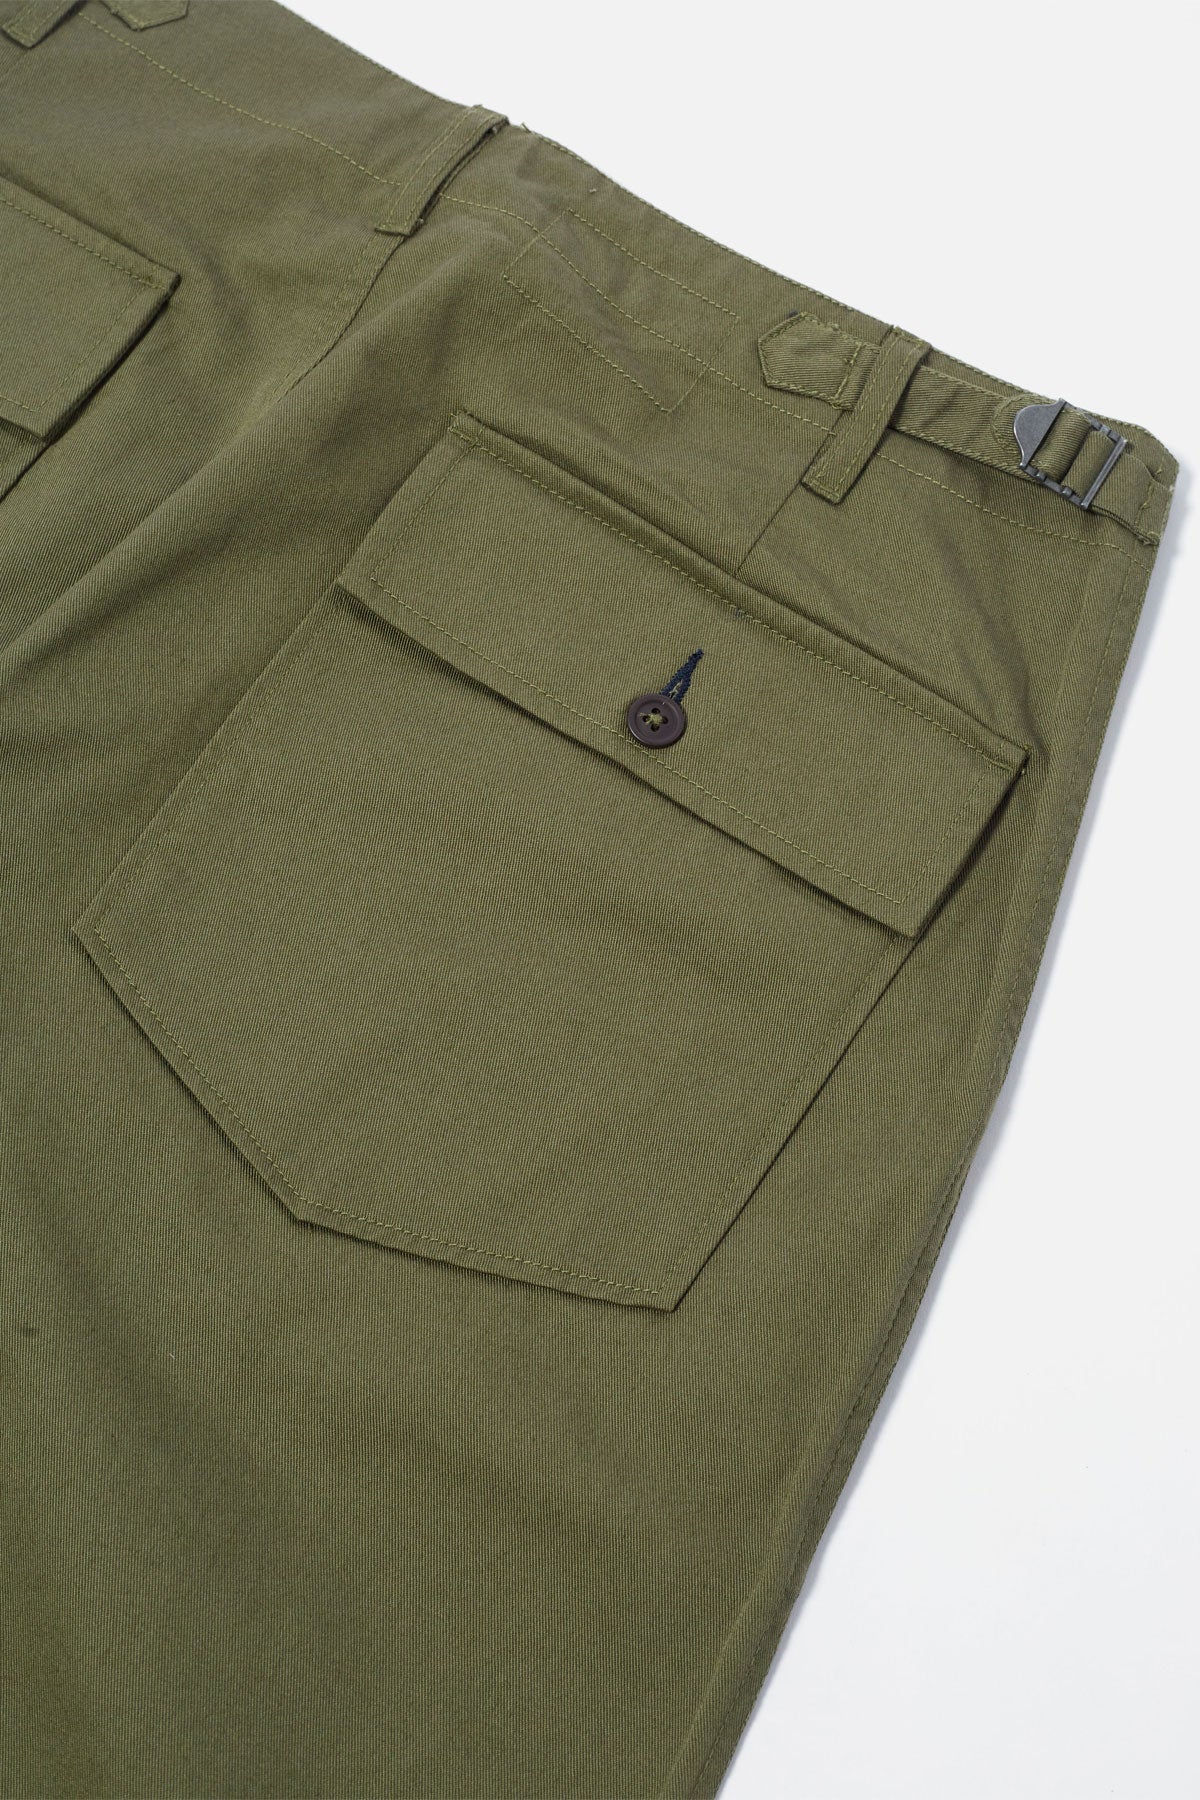 Universal Works - Fatigue Pant In Light Olive Twill